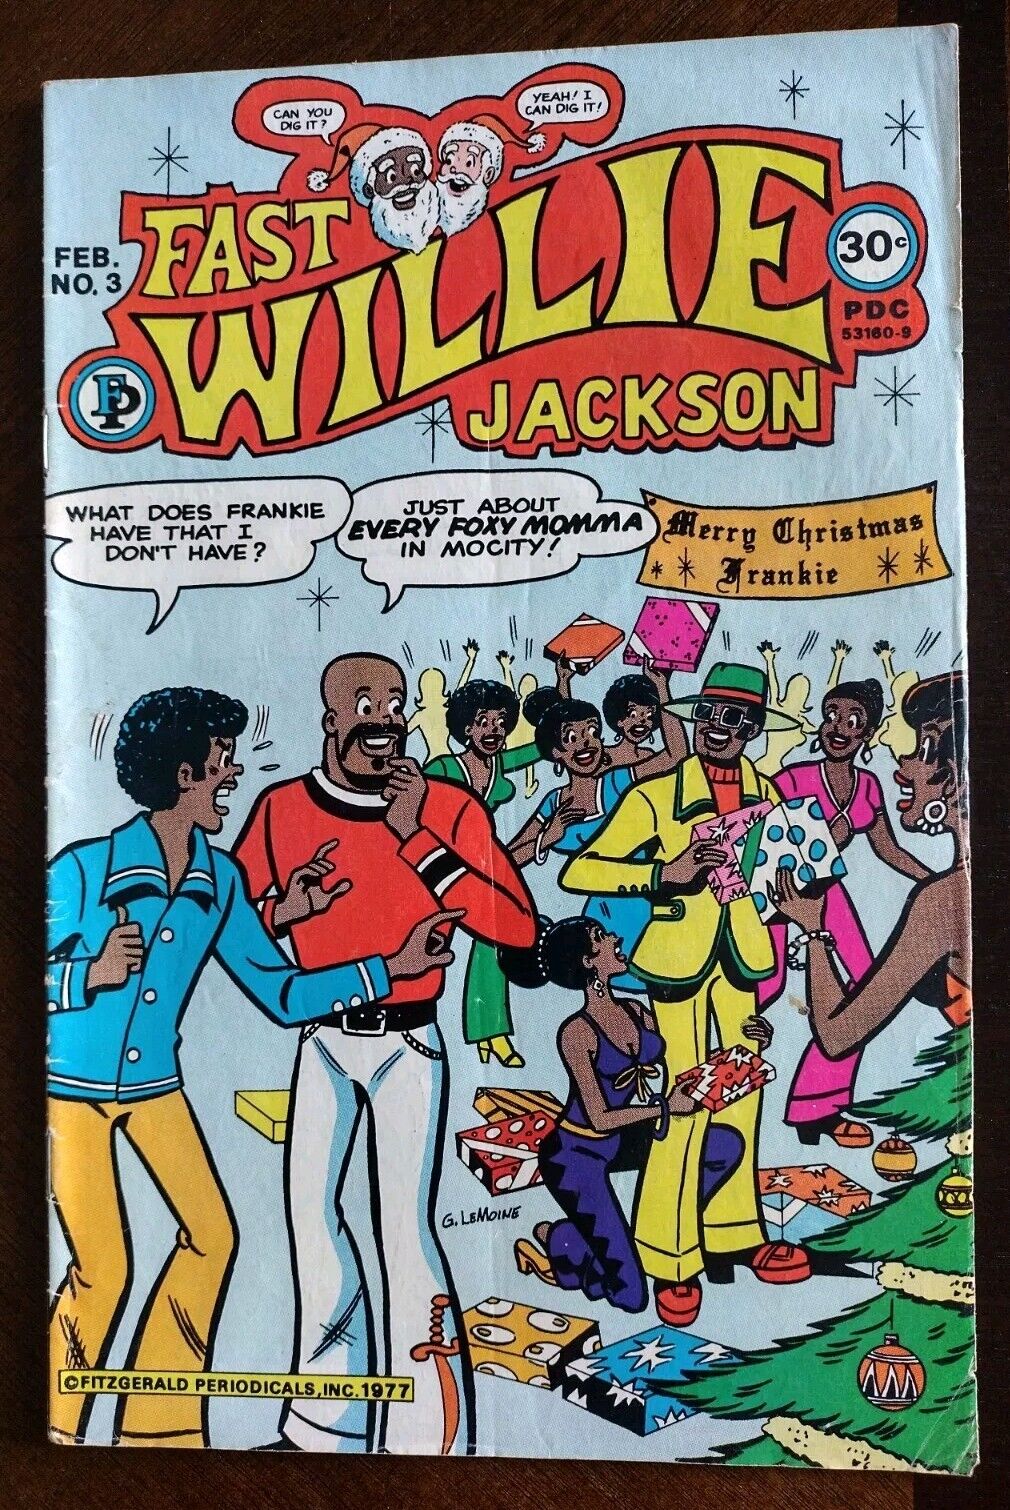 Fast Willie Jackson #3 Christmas Cover Fitzgerald Comics Black Archie Xmas